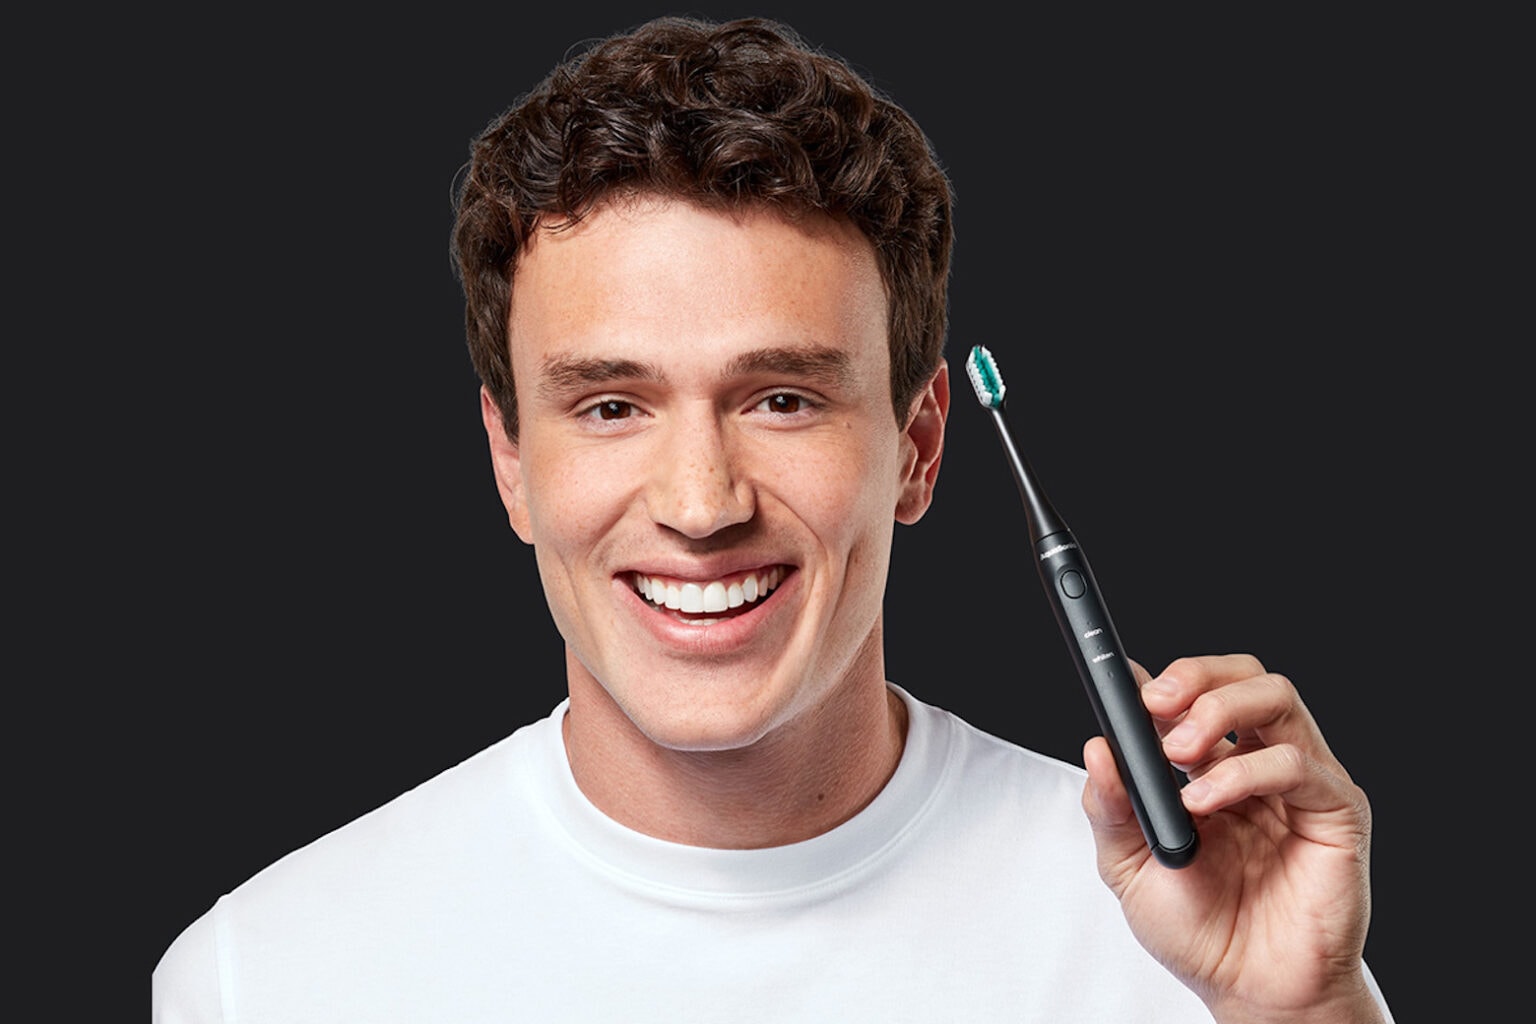 This $25 smart toothbrush knows when to stop cleaning.